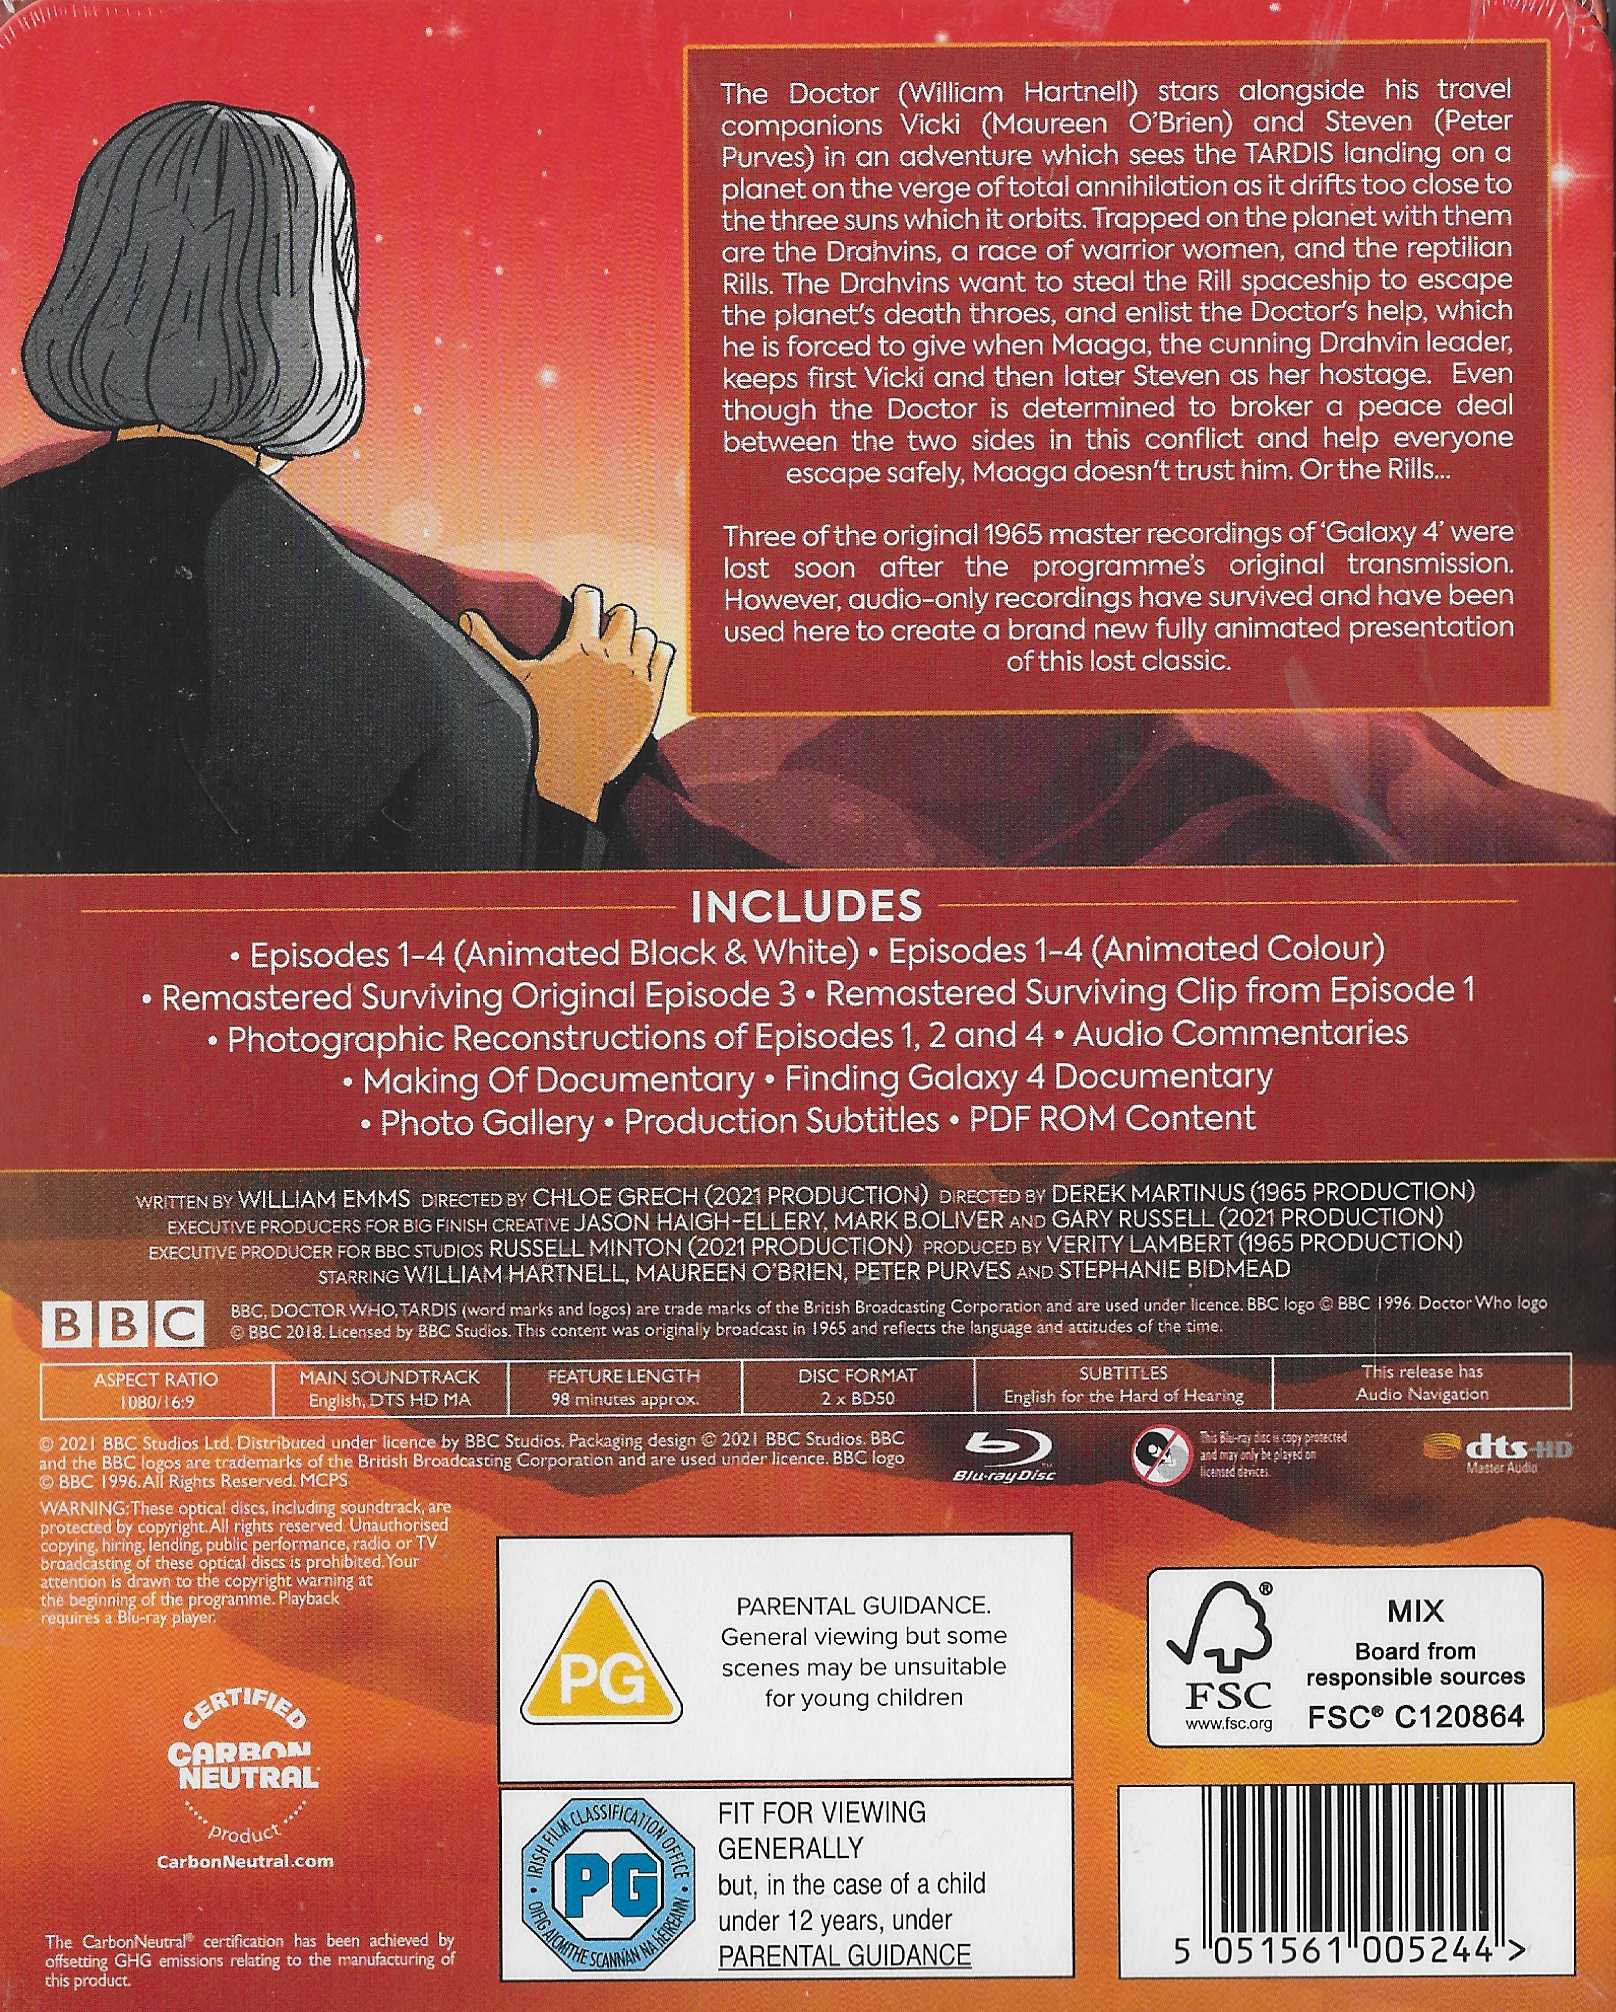 Picture of BBCBD 0524 Doctor Who - Galaxy 4 by artist William Emms from the BBC records and Tapes library